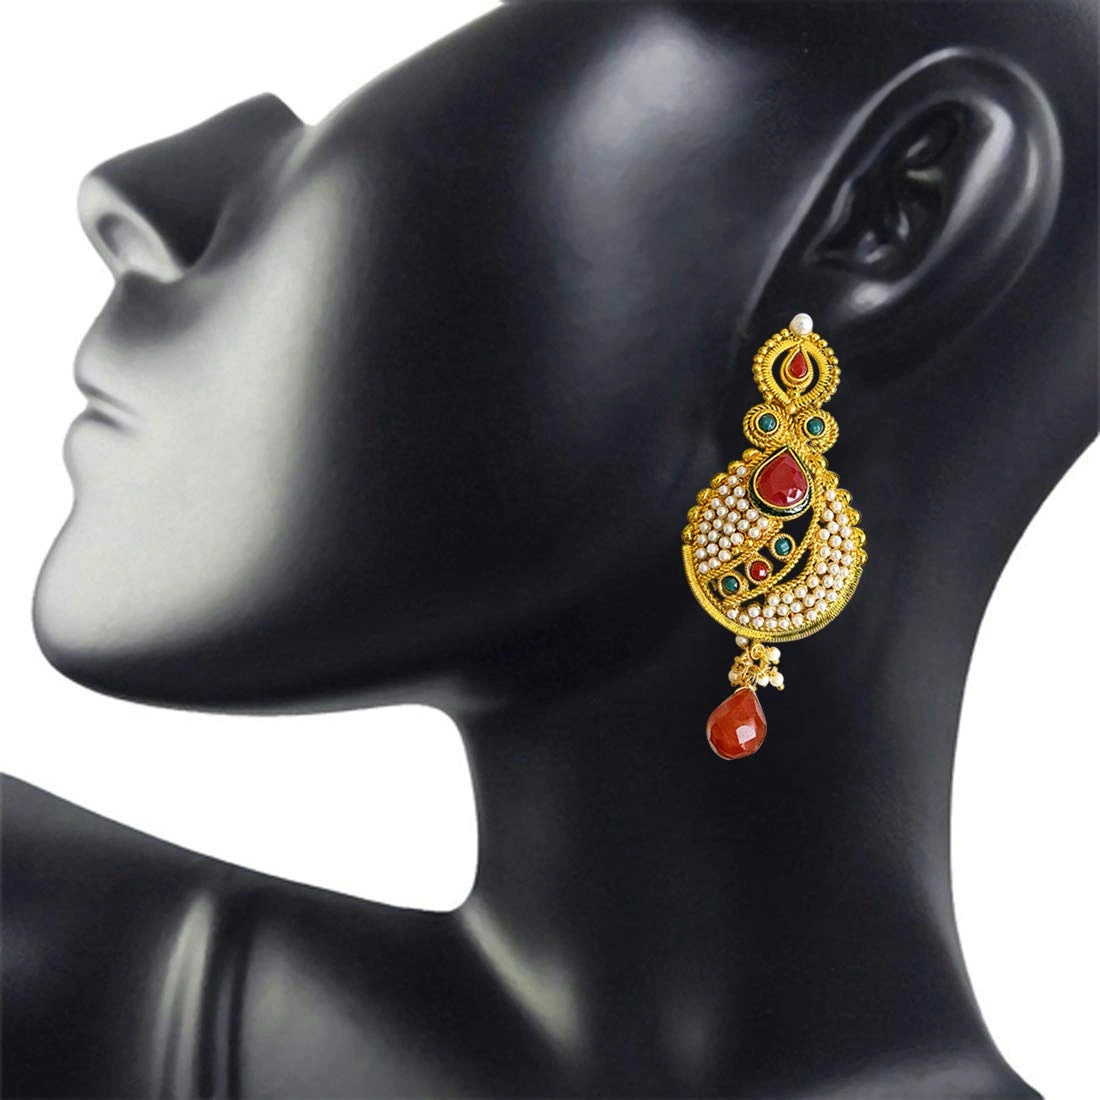 Ethnic Copper Gold Plated Red & Green Coloured Stone Dangling Earrings